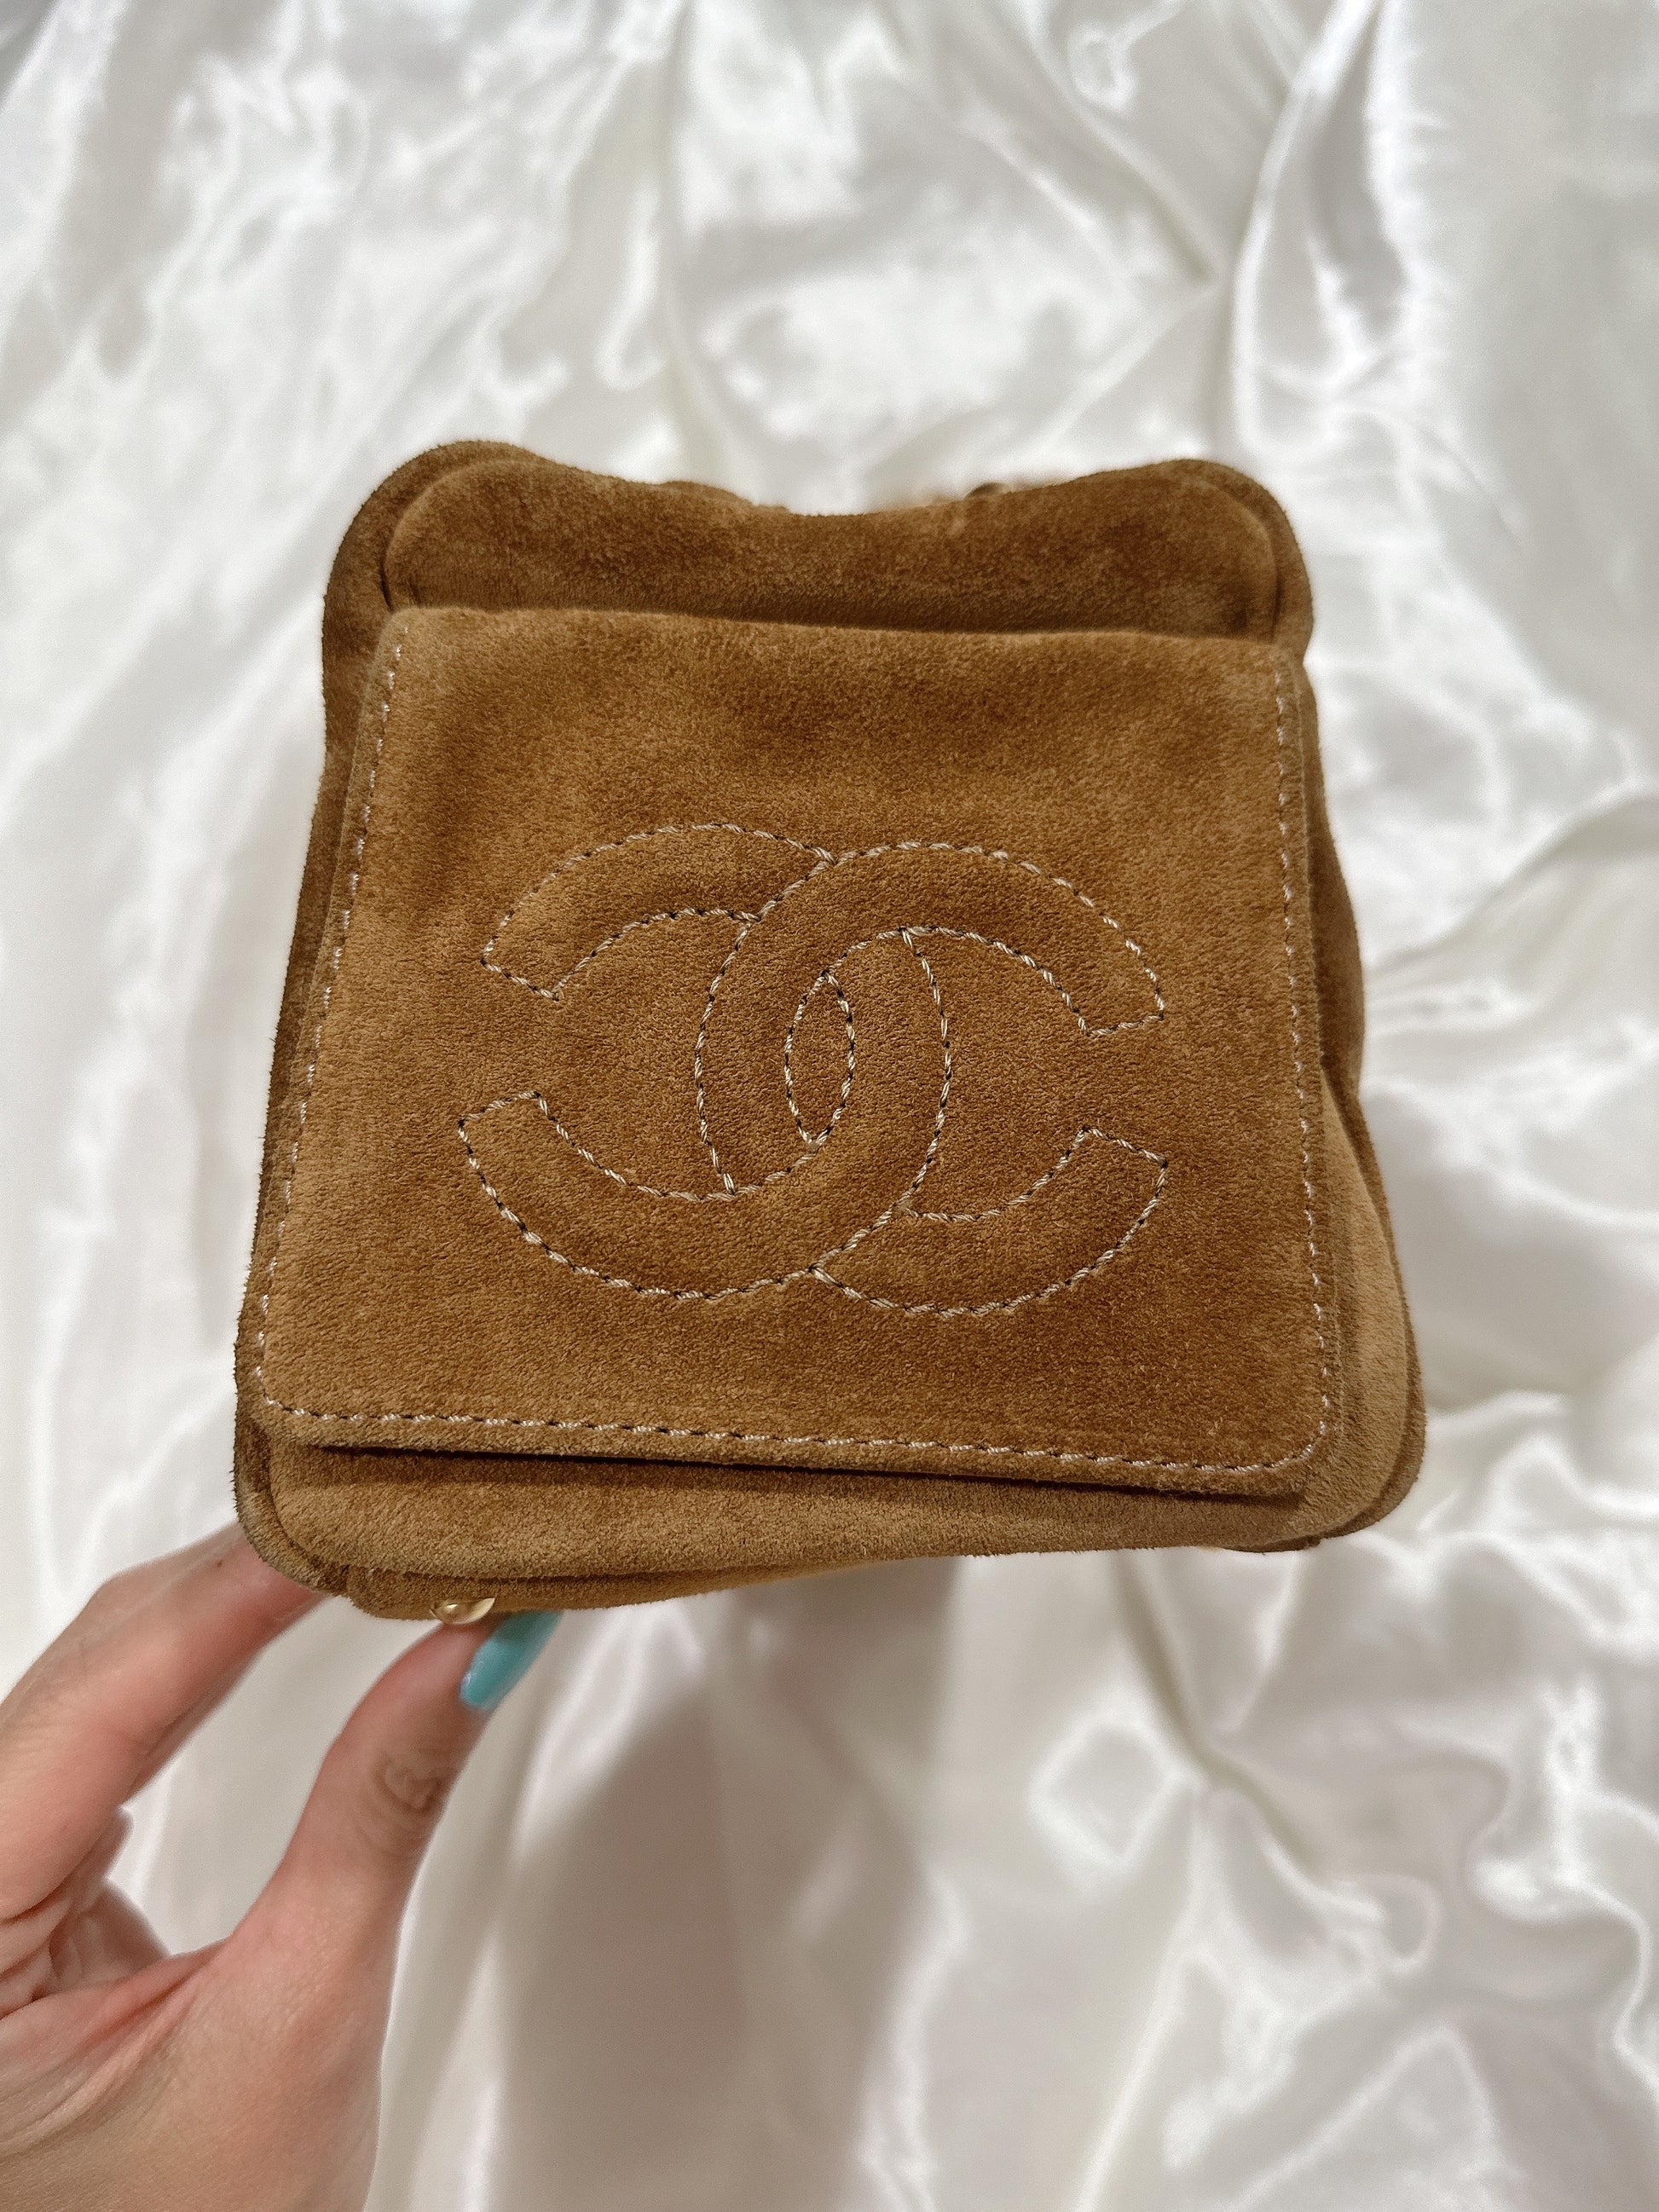 Chanel suede bag 咖啡麂皮方包 - STAY PURE